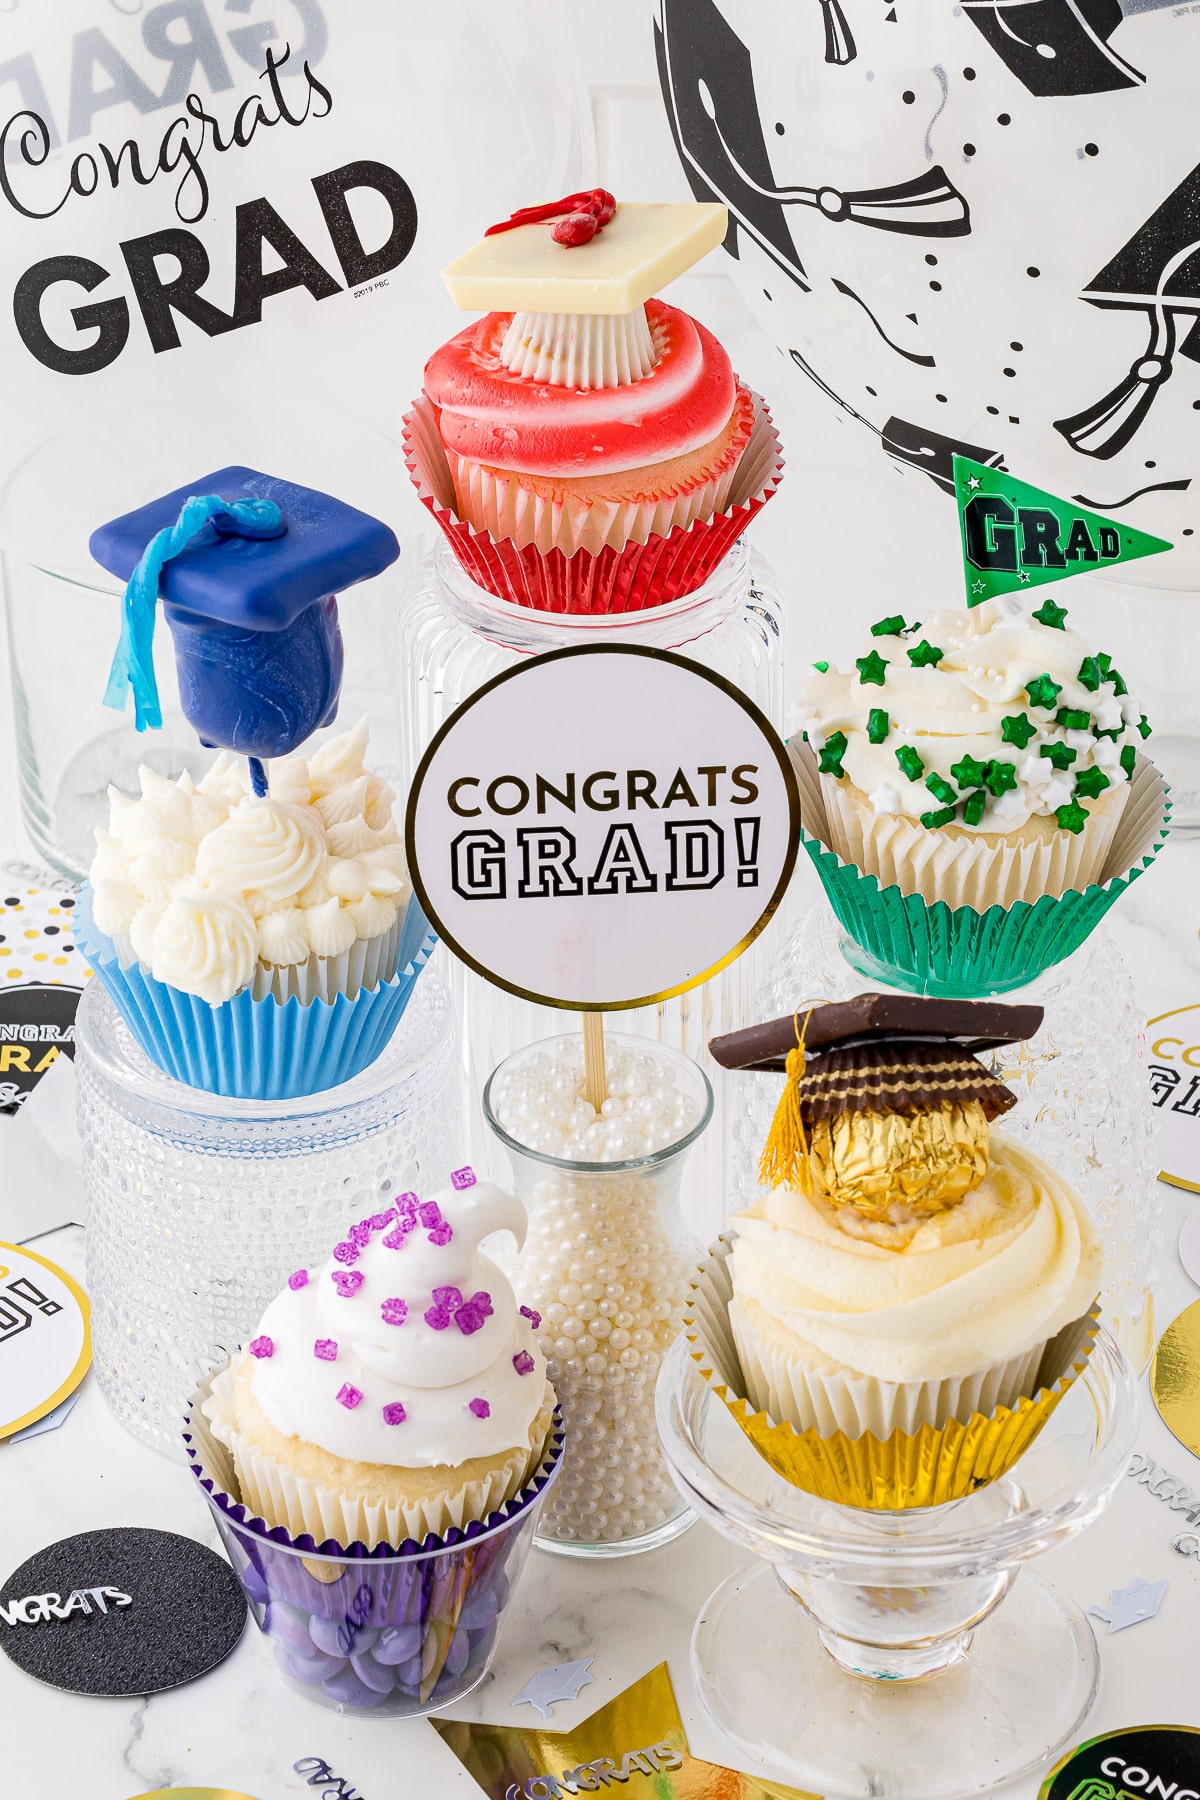 A grouping of graduation themed cupcakes with a Congrats Grad! sign in the middle